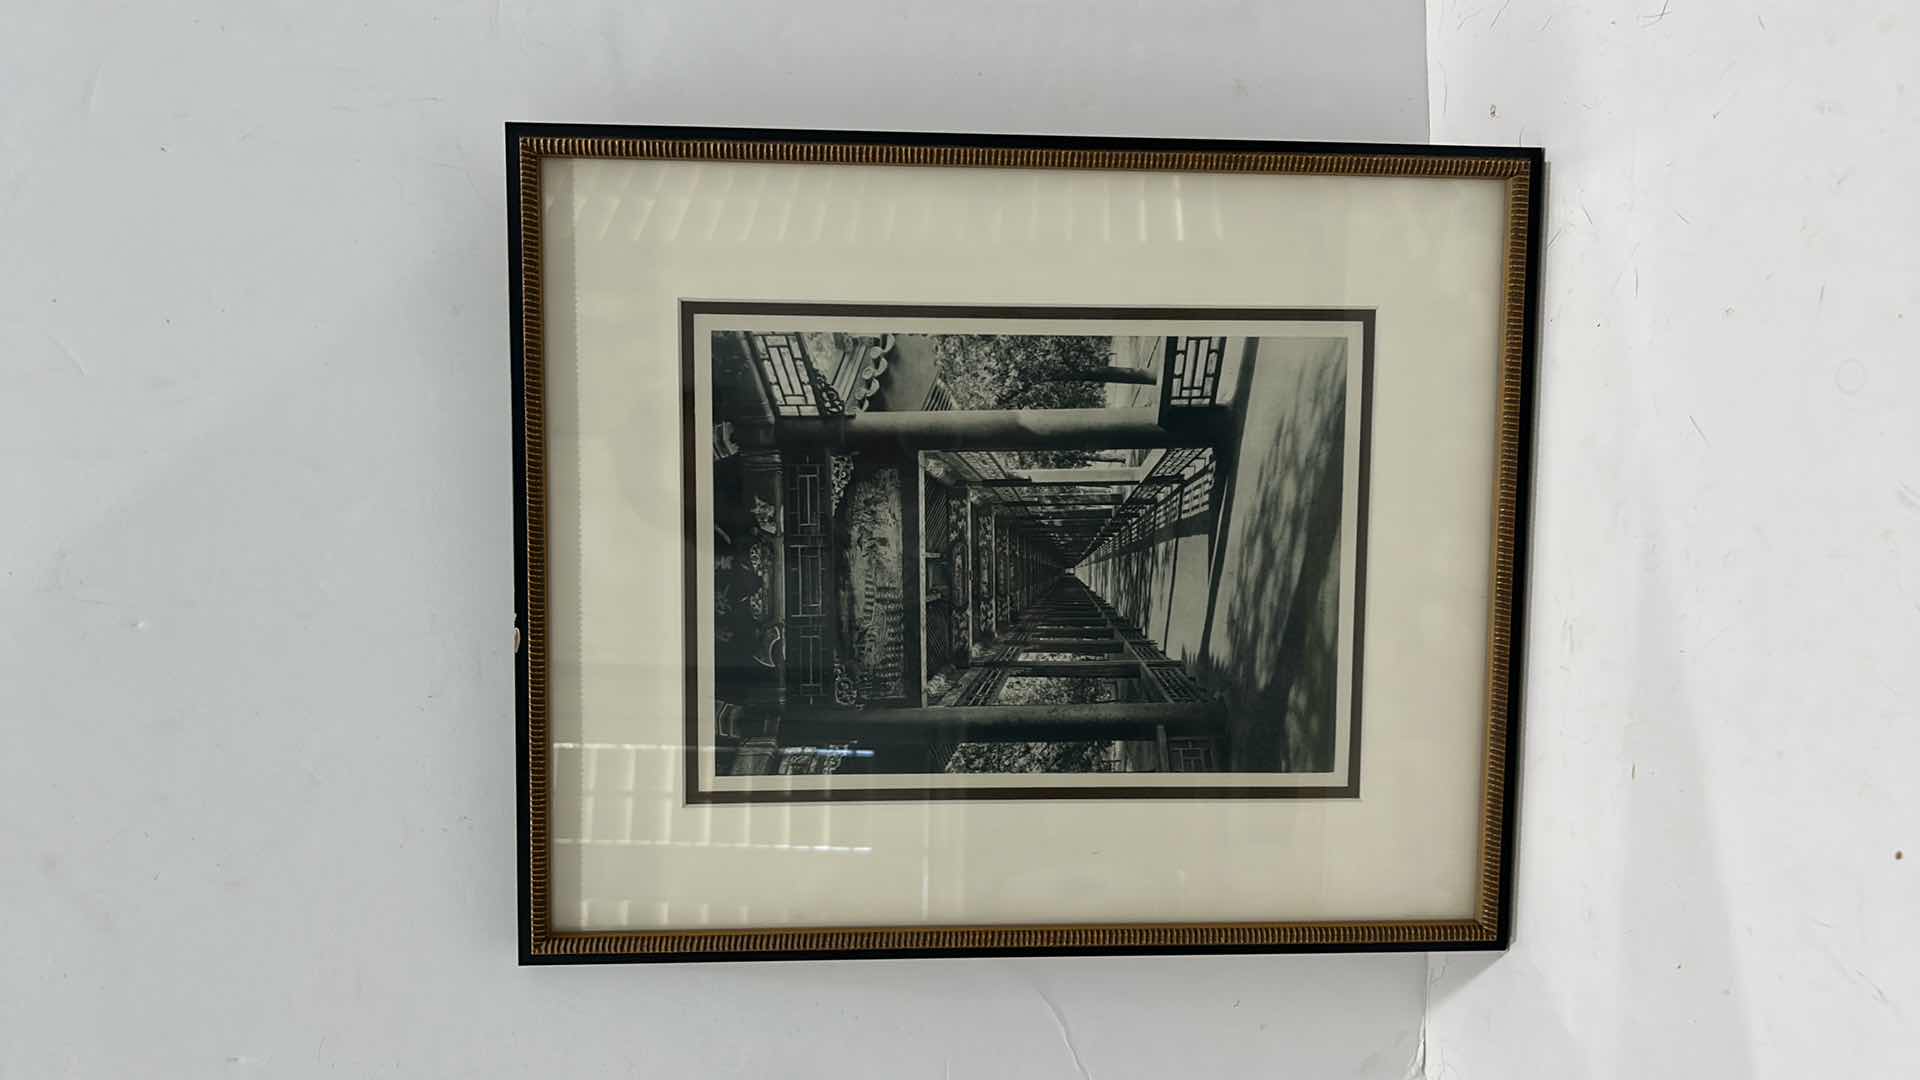 Photo 5 of ORIGINAL PHOTOGRAPH BY DONALD MENNIE "THE LONG GALLERY- SUMMER PALACE FRAMED ARTWORK 13 1/2” x 16 1/2”